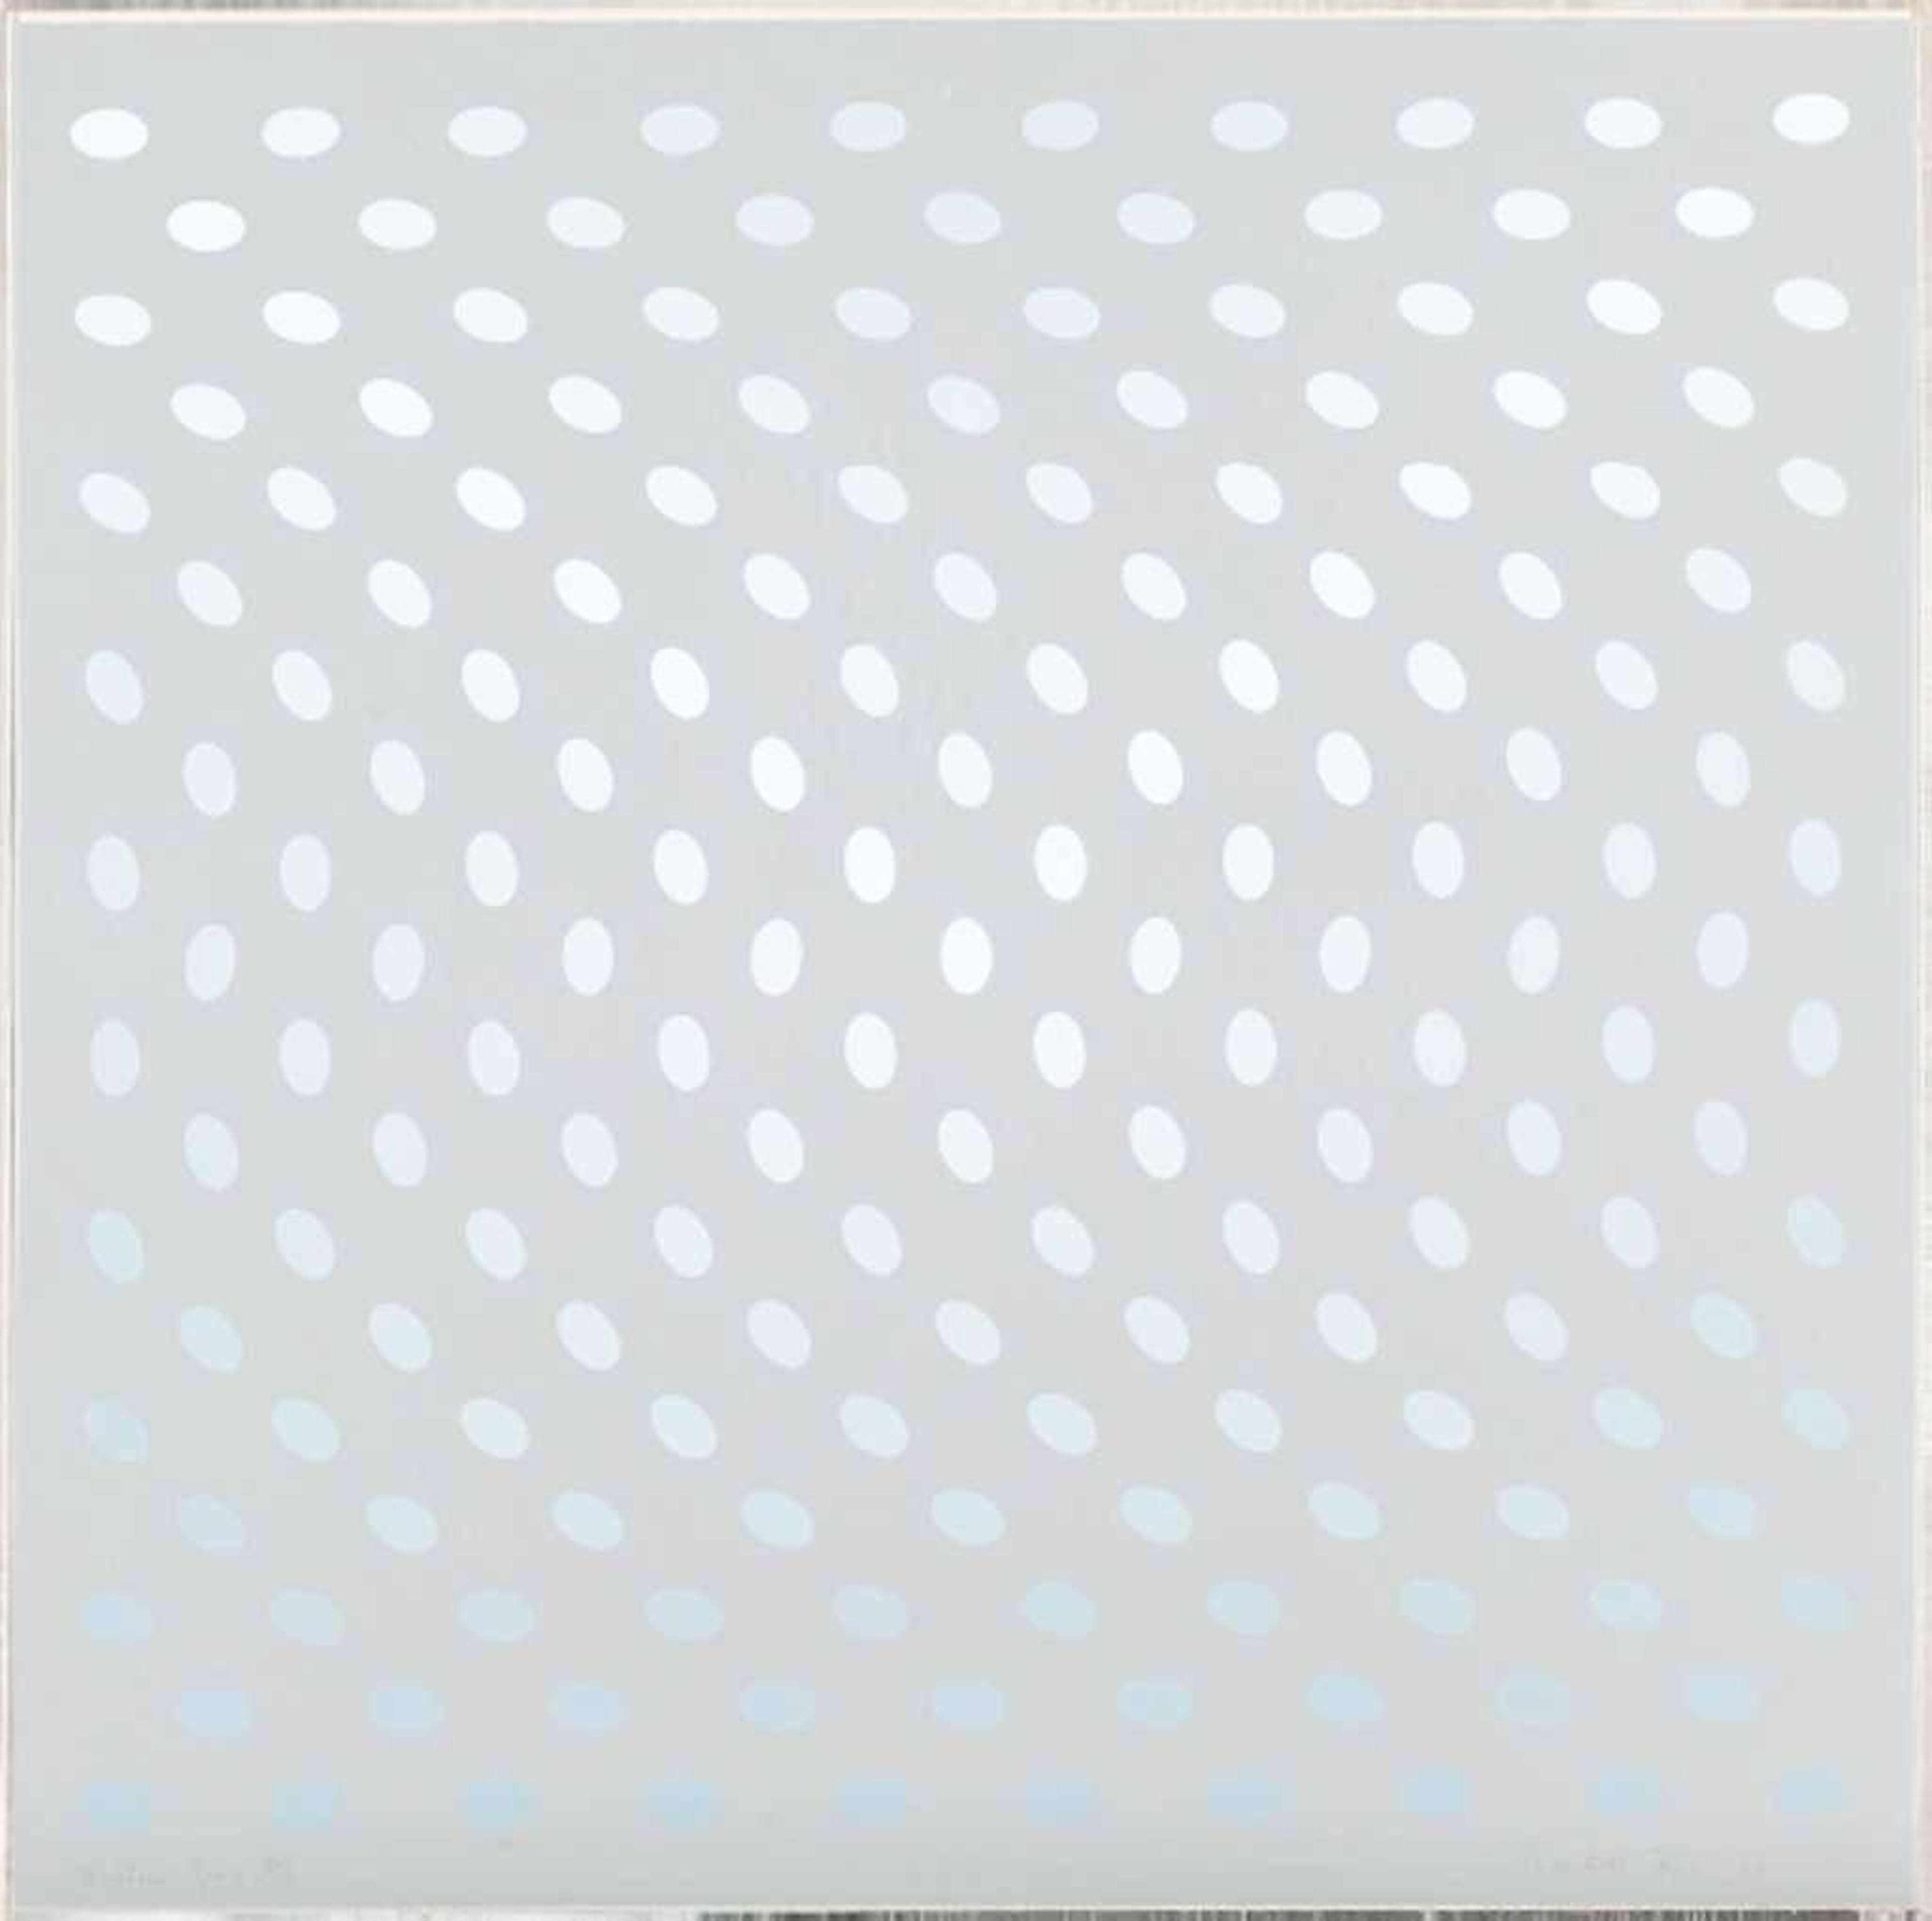 Bridget Riley’s Nineteen Greys A. An optical illusion screenprint of silver dots against a white background. 